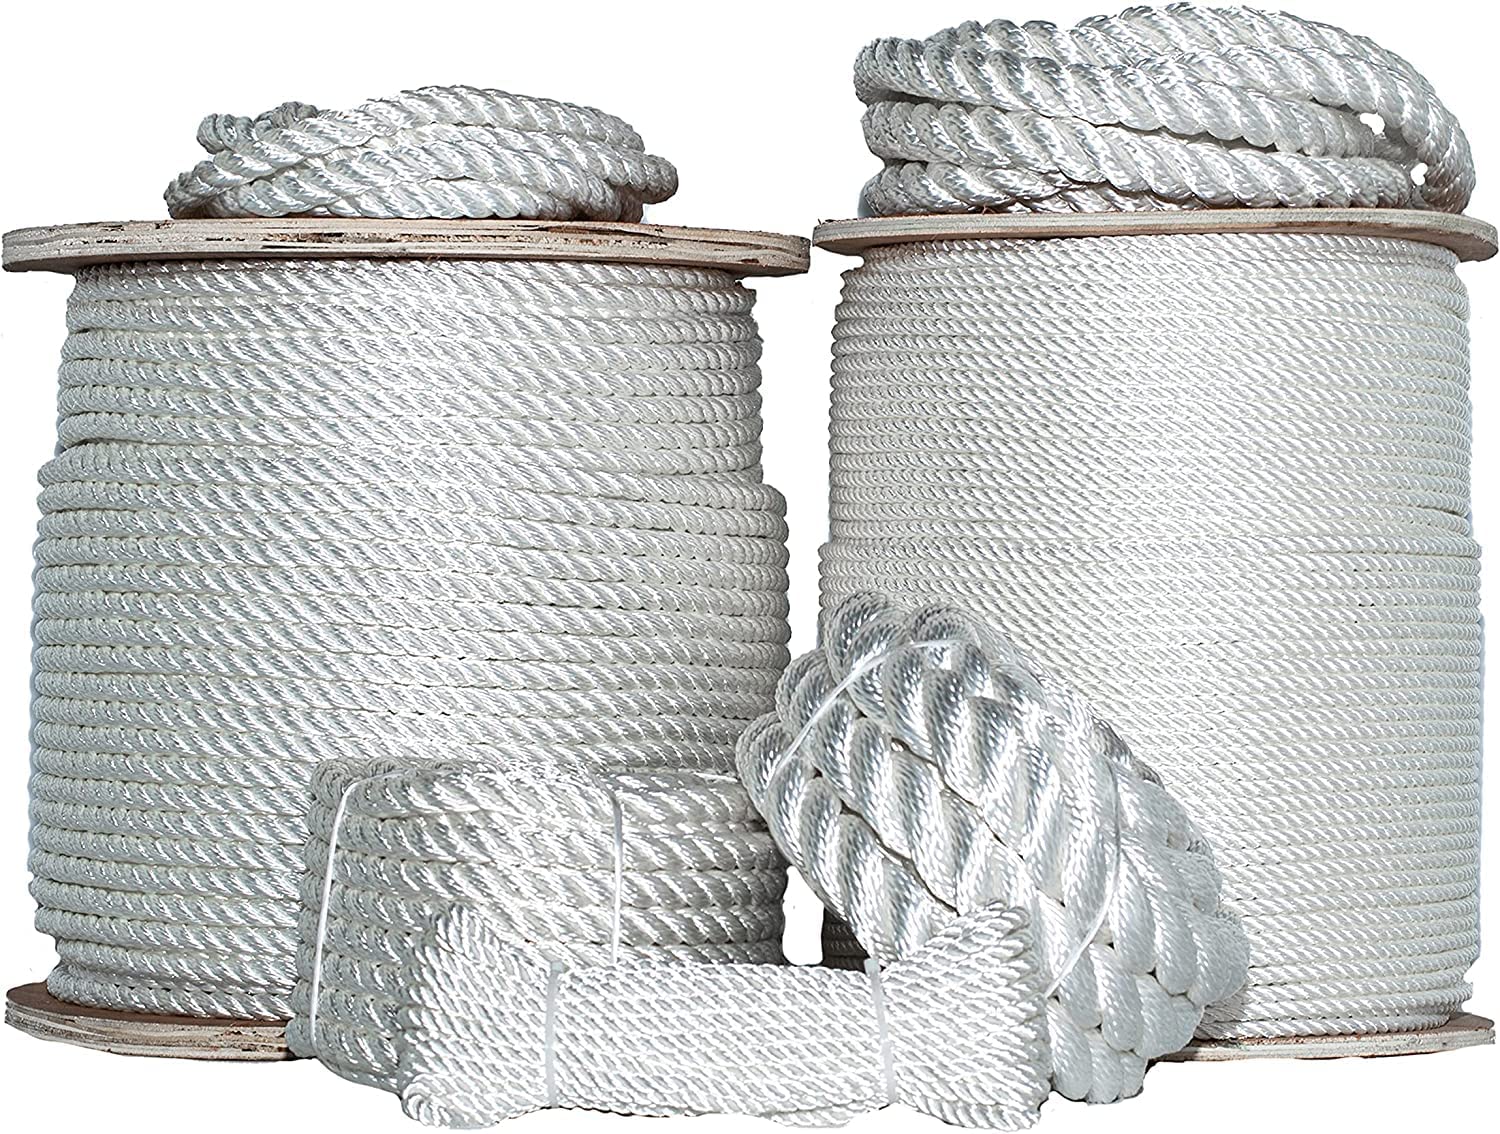 SGT KNOTS Twisted Polyester – Low Stretch and High Strength Rope for Rigging, Crafts & More (1/2" x 10ft, White)